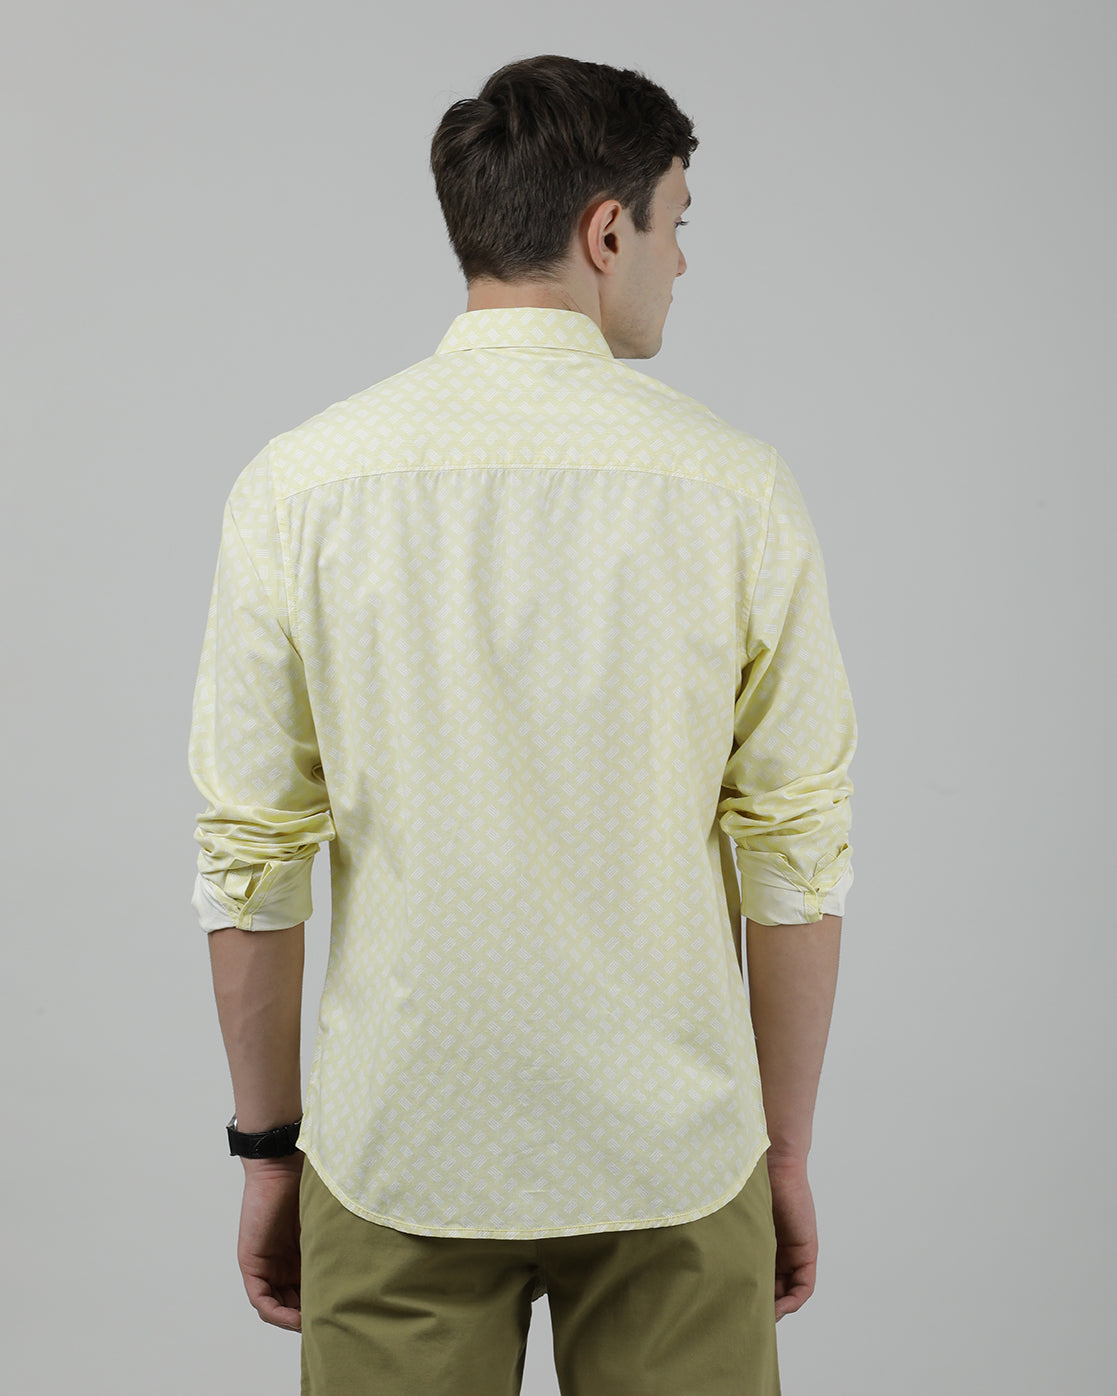 Casual Full Sleeve Comfort Fit Printed Shirt Yellow with Collar for Men